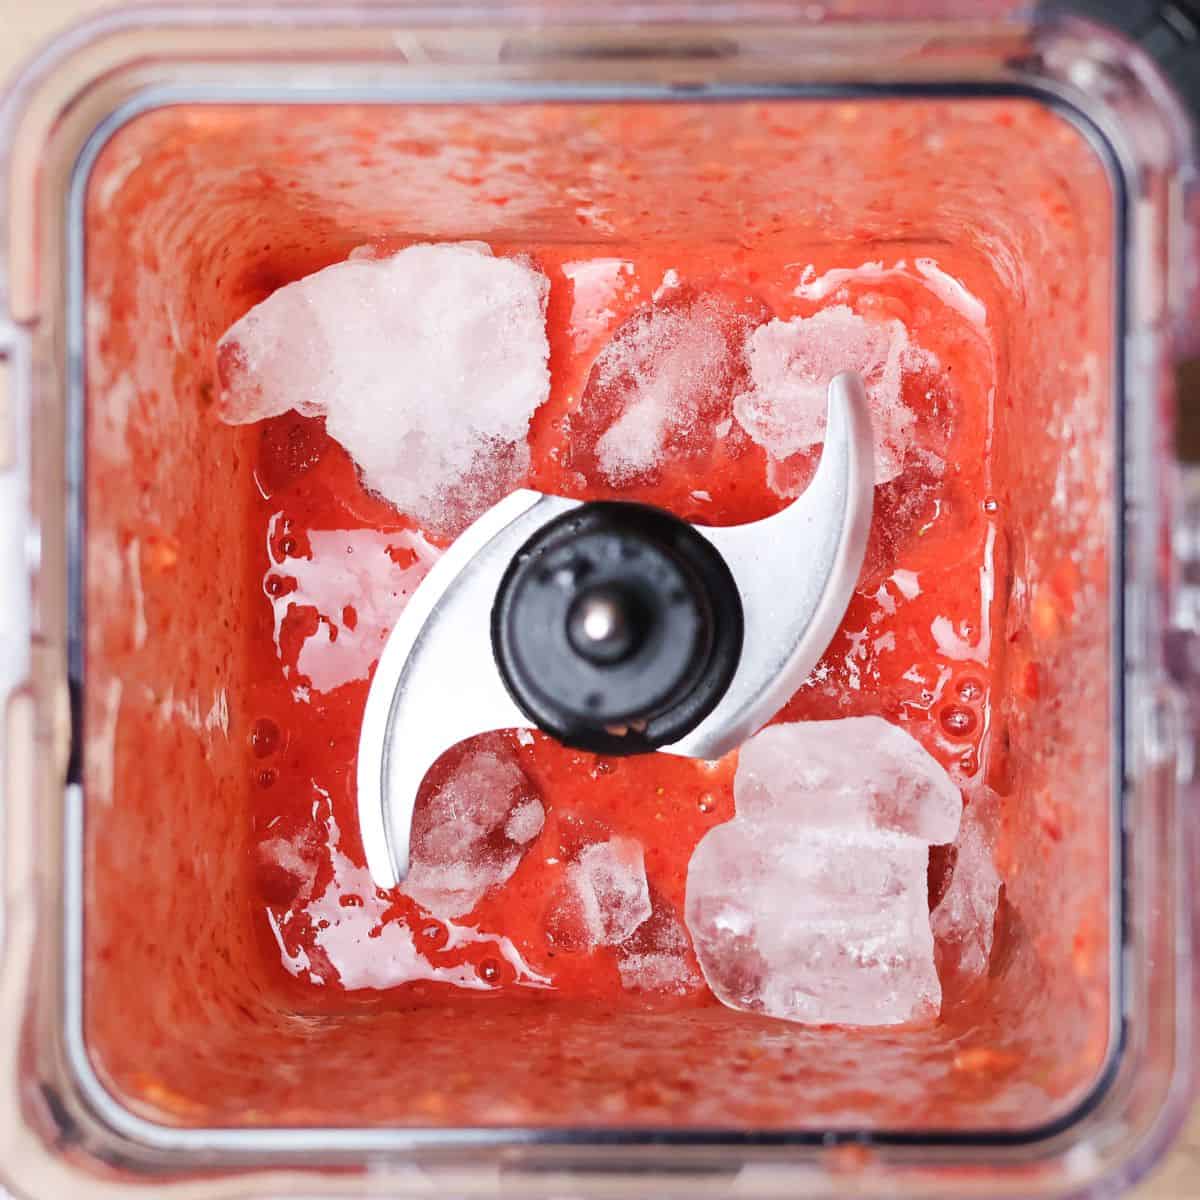 A blender view from above with a bright red smoothie mixture with added ice cubes to adjust the consistency.